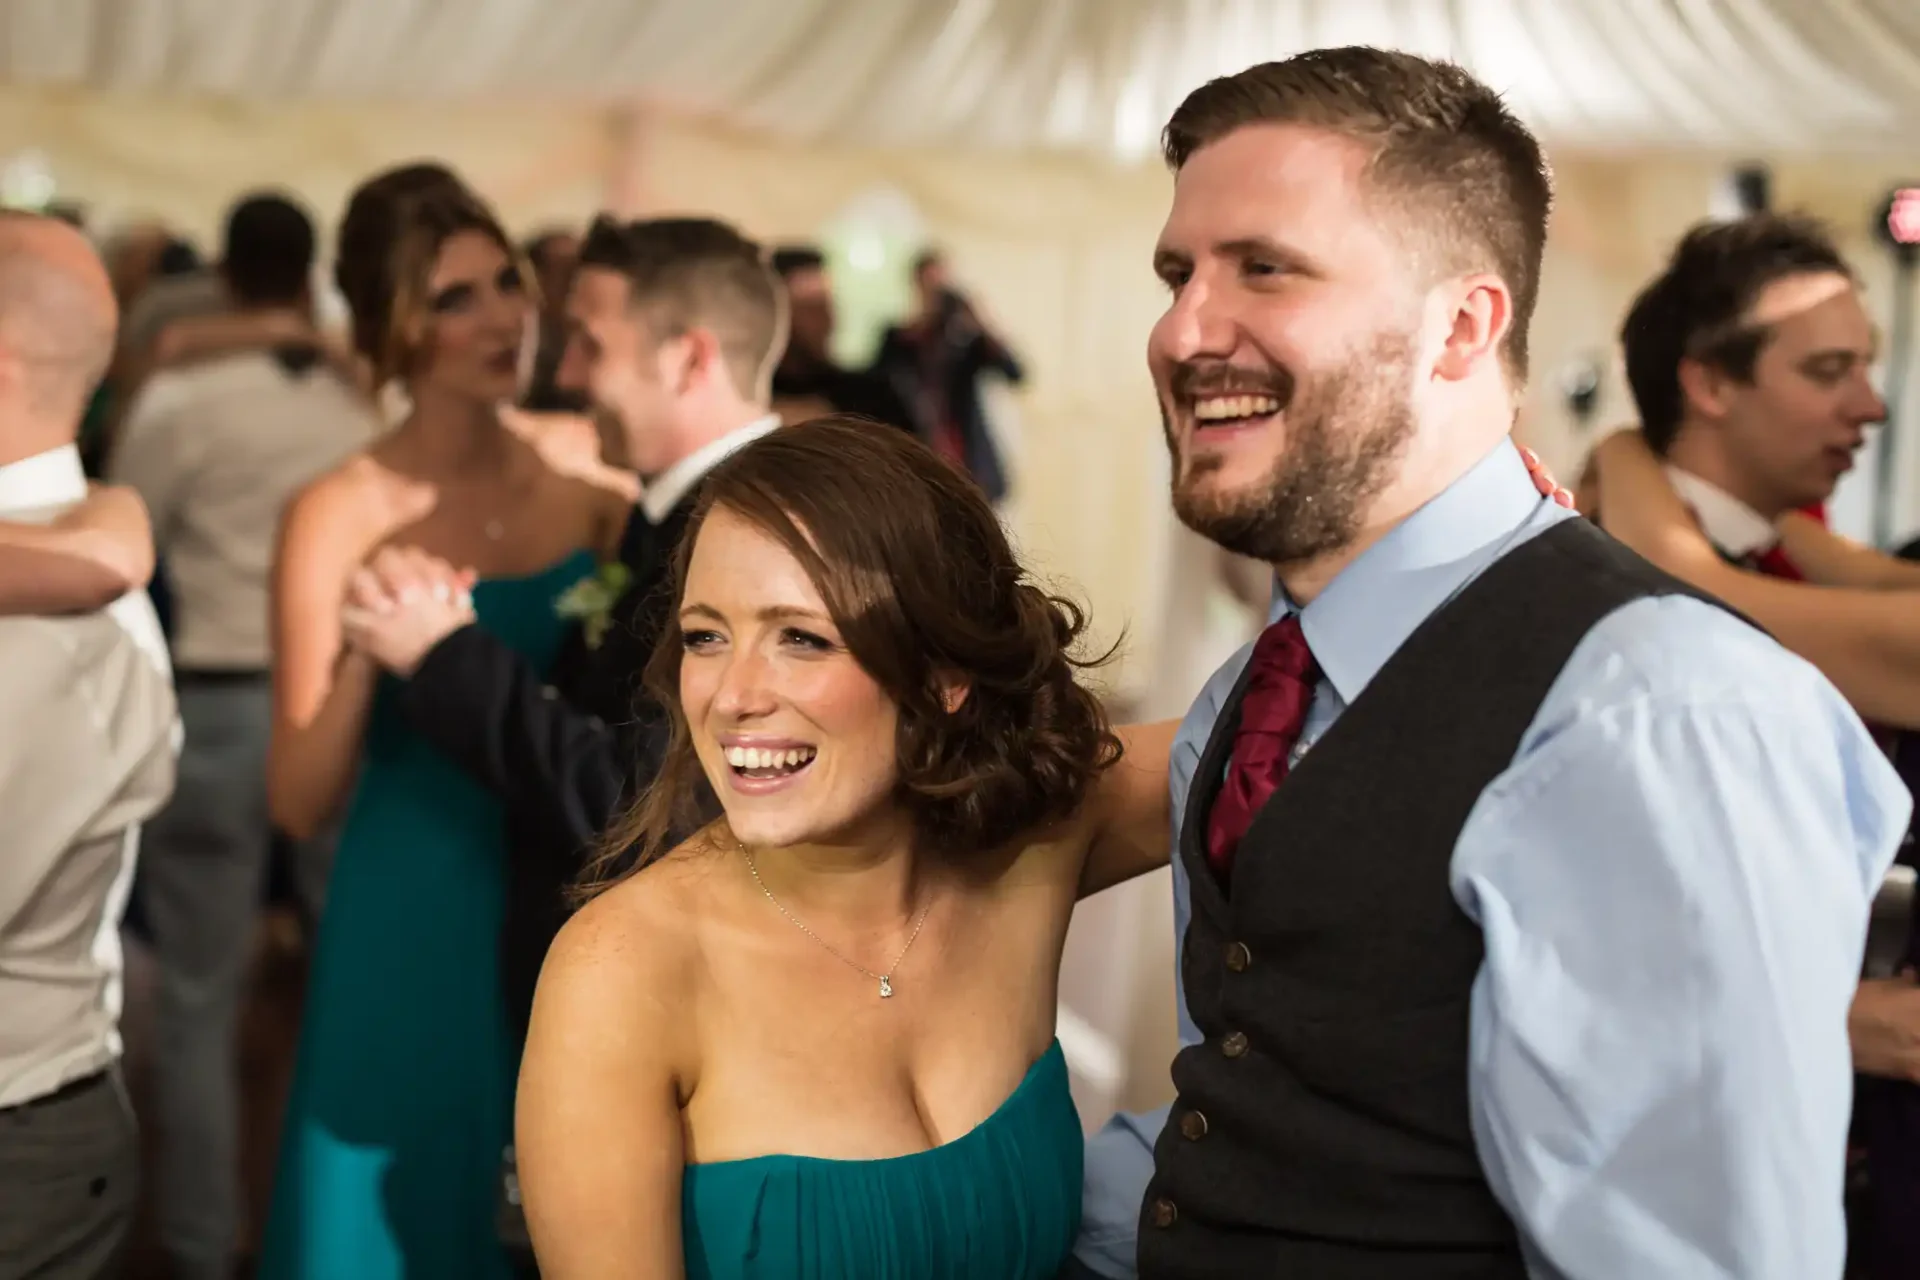 A joyful woman in a green dress and a man in a gray vest and red tie laughing together at a lively wedding reception.